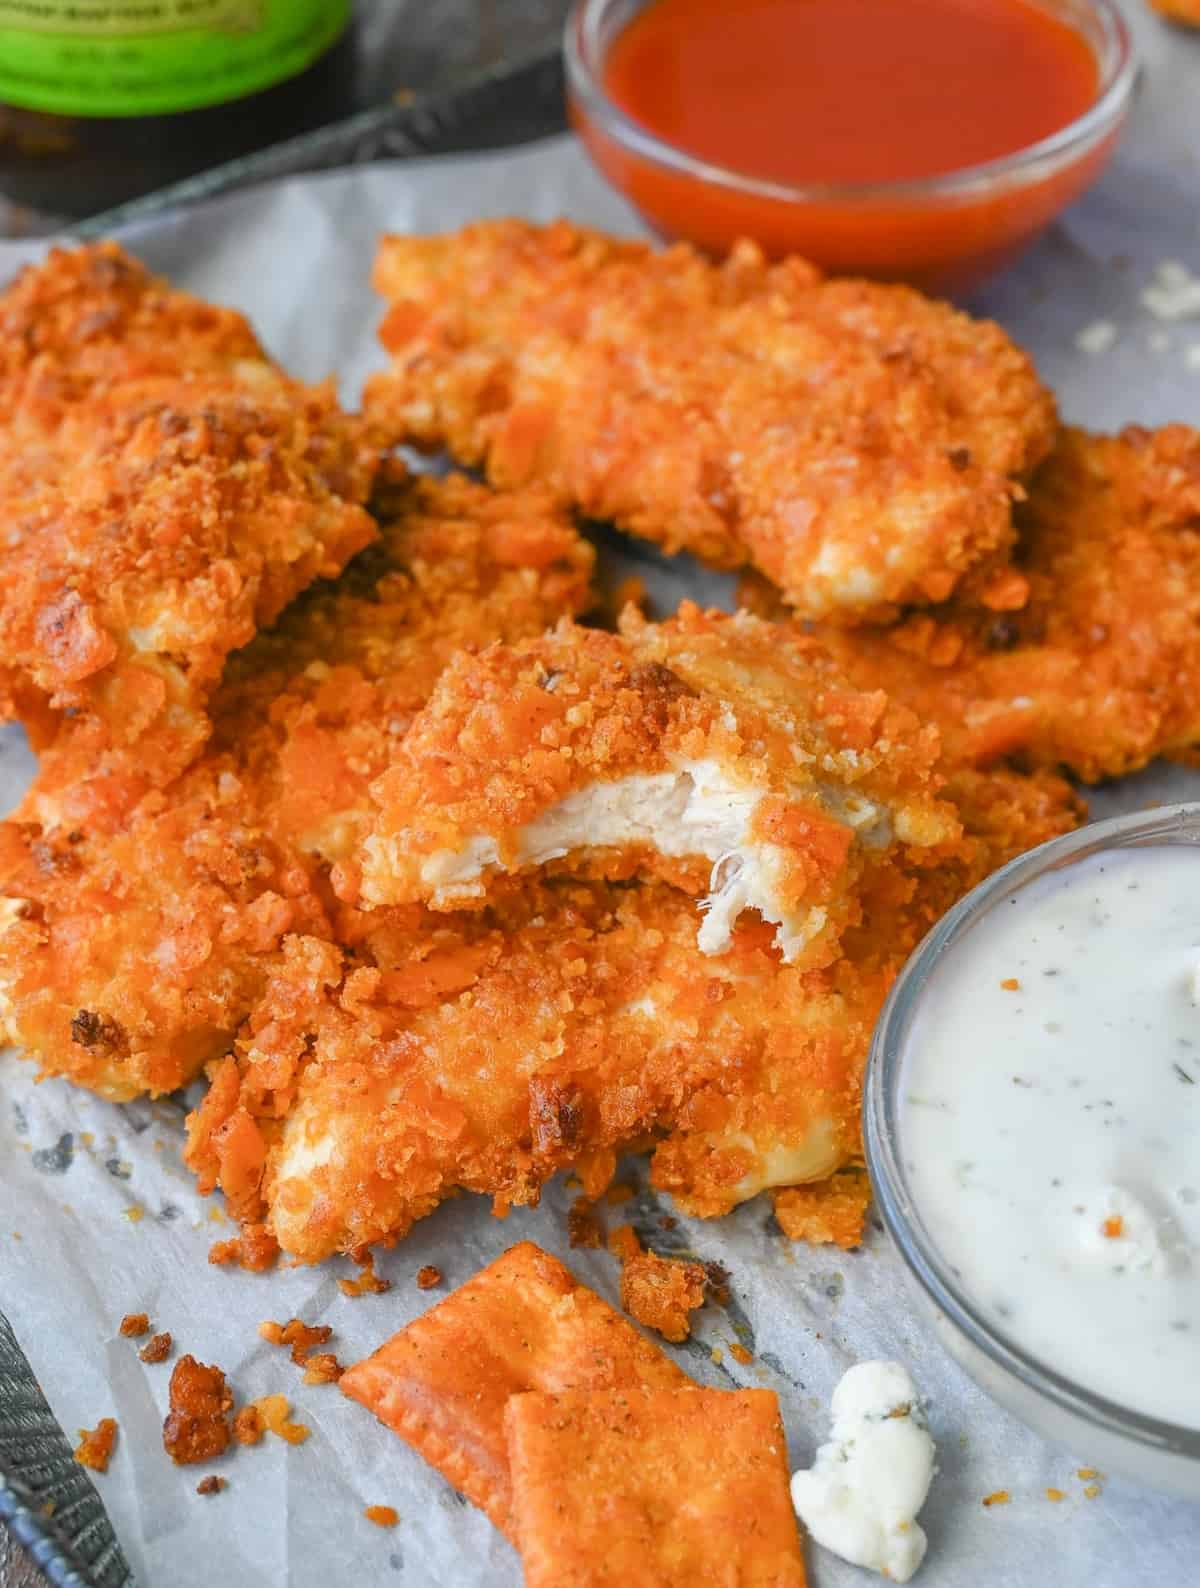 A tray of buffalo chicken tenders and sauces. One tender has a bite taken out of it.